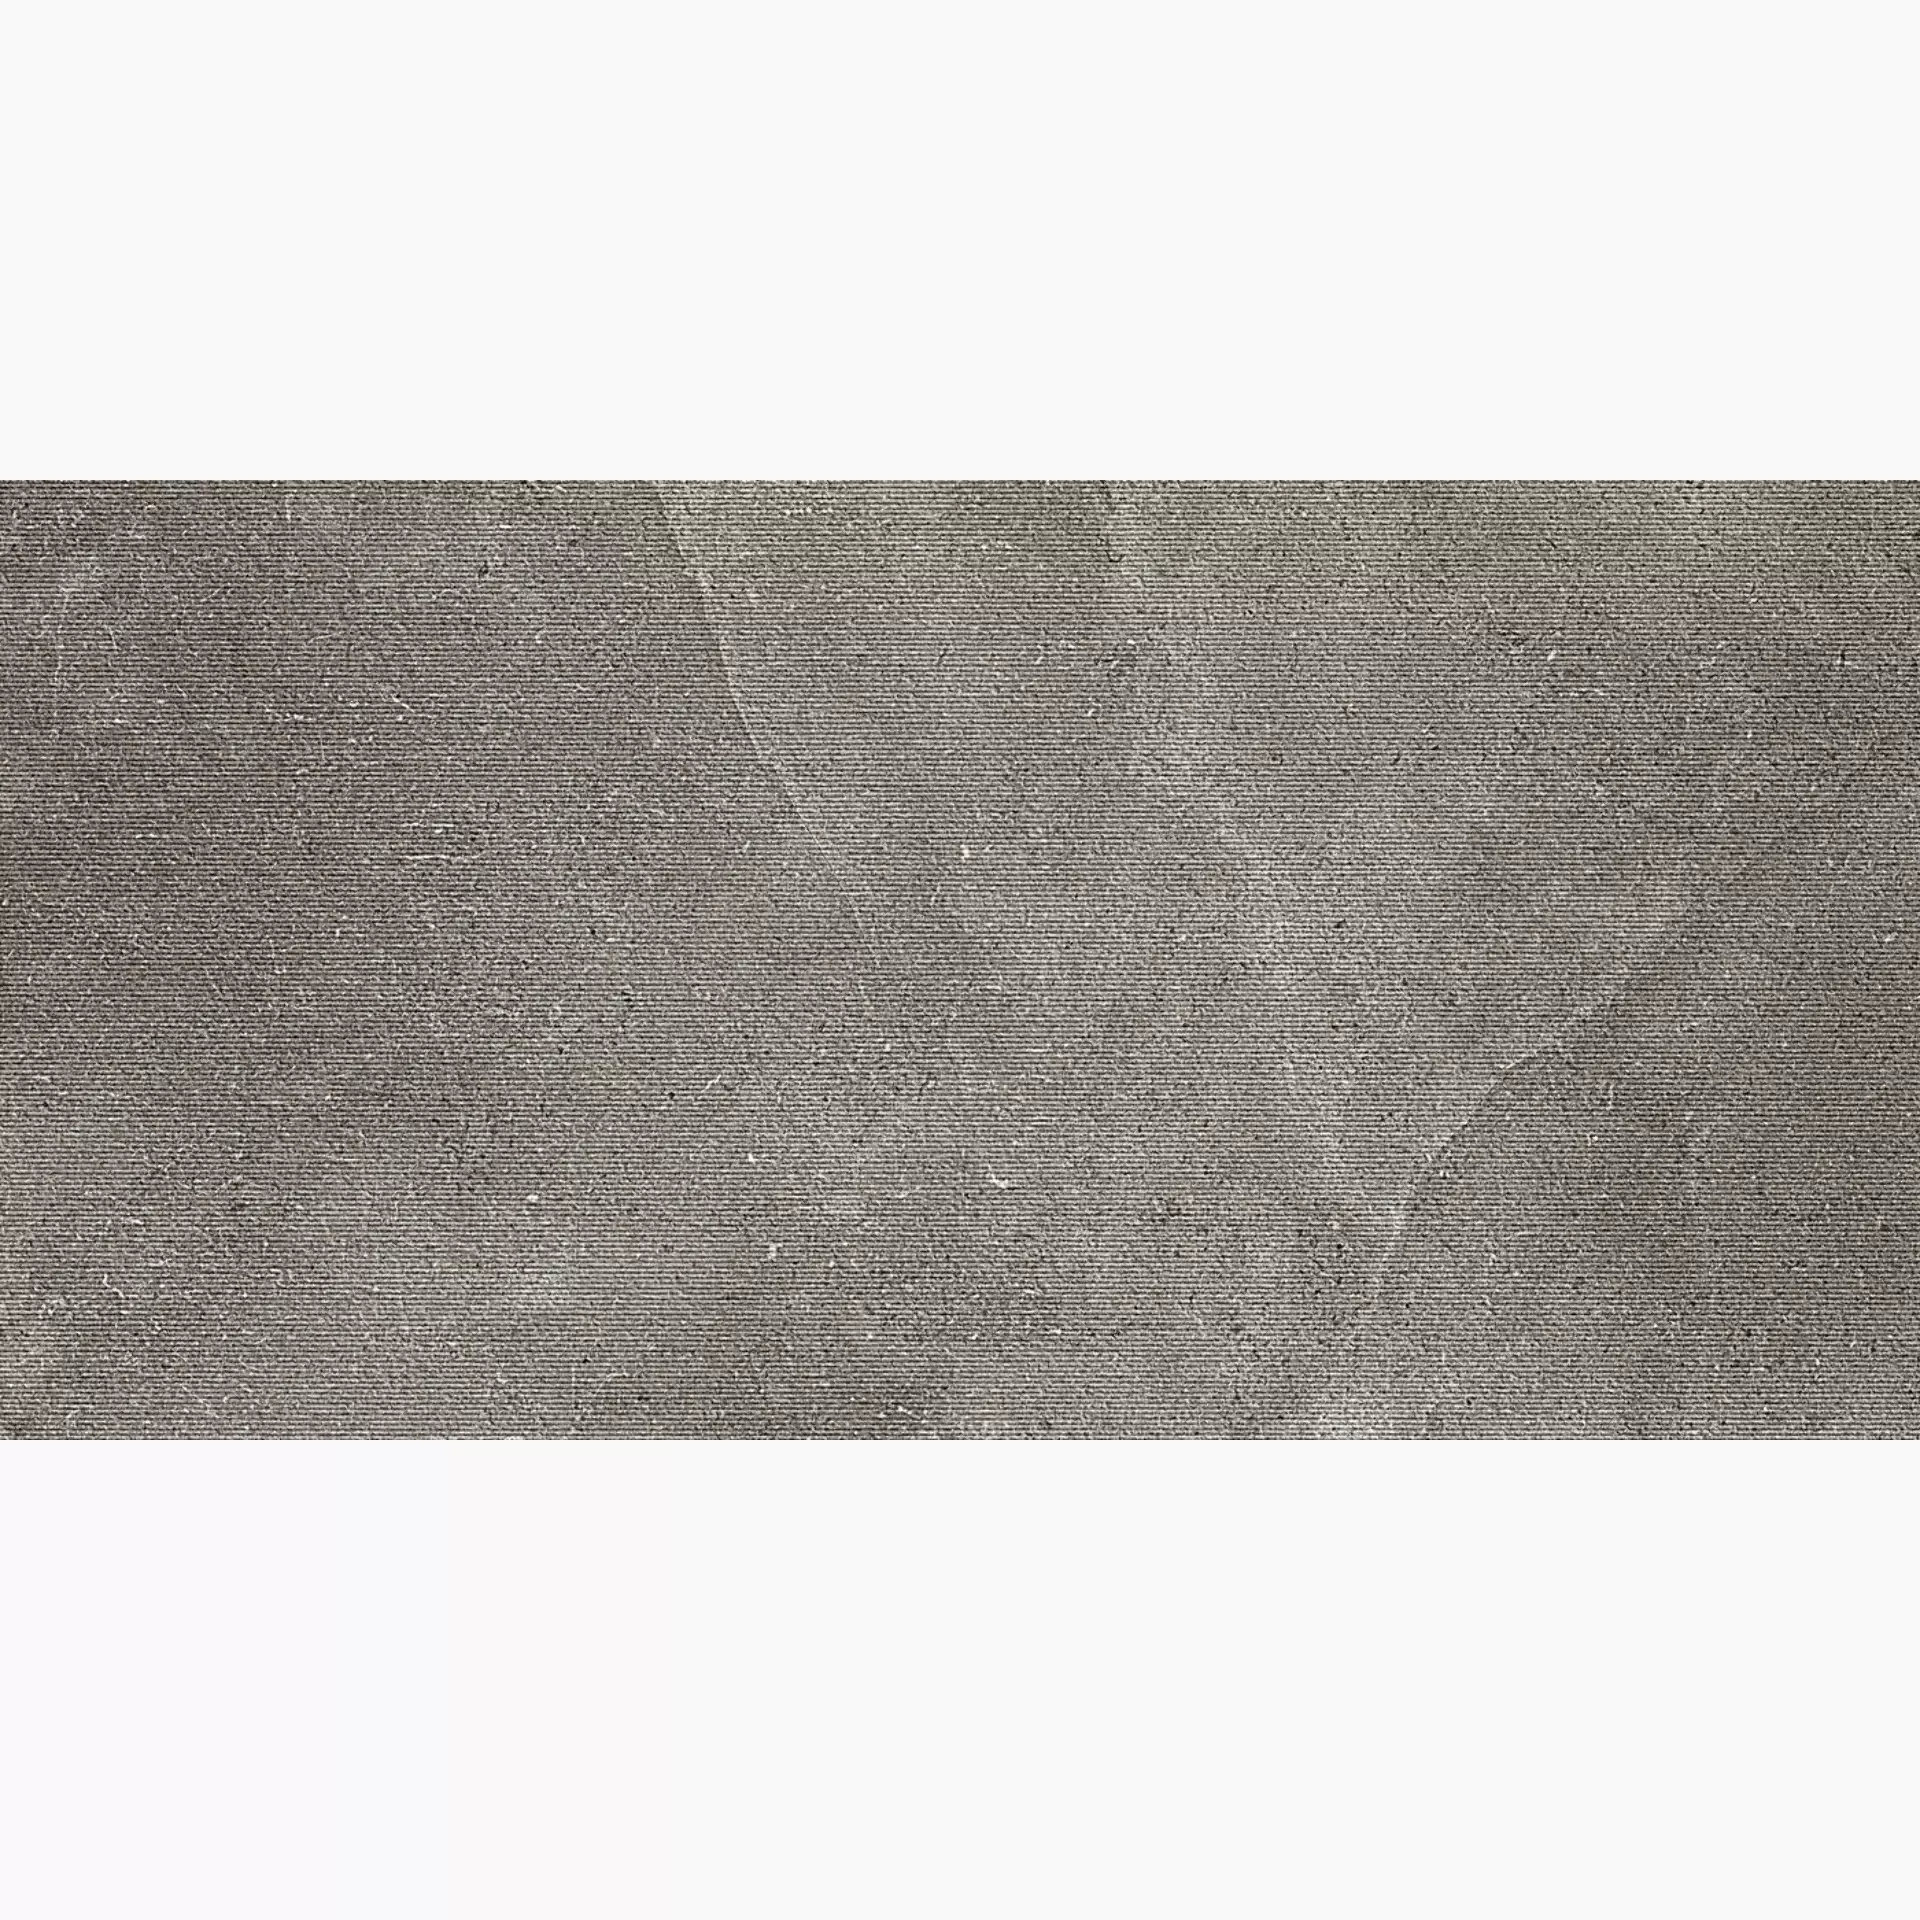 Magica Leccese Fossile Chiselled MALC04612CH 60x120cm rectified 10,5mm